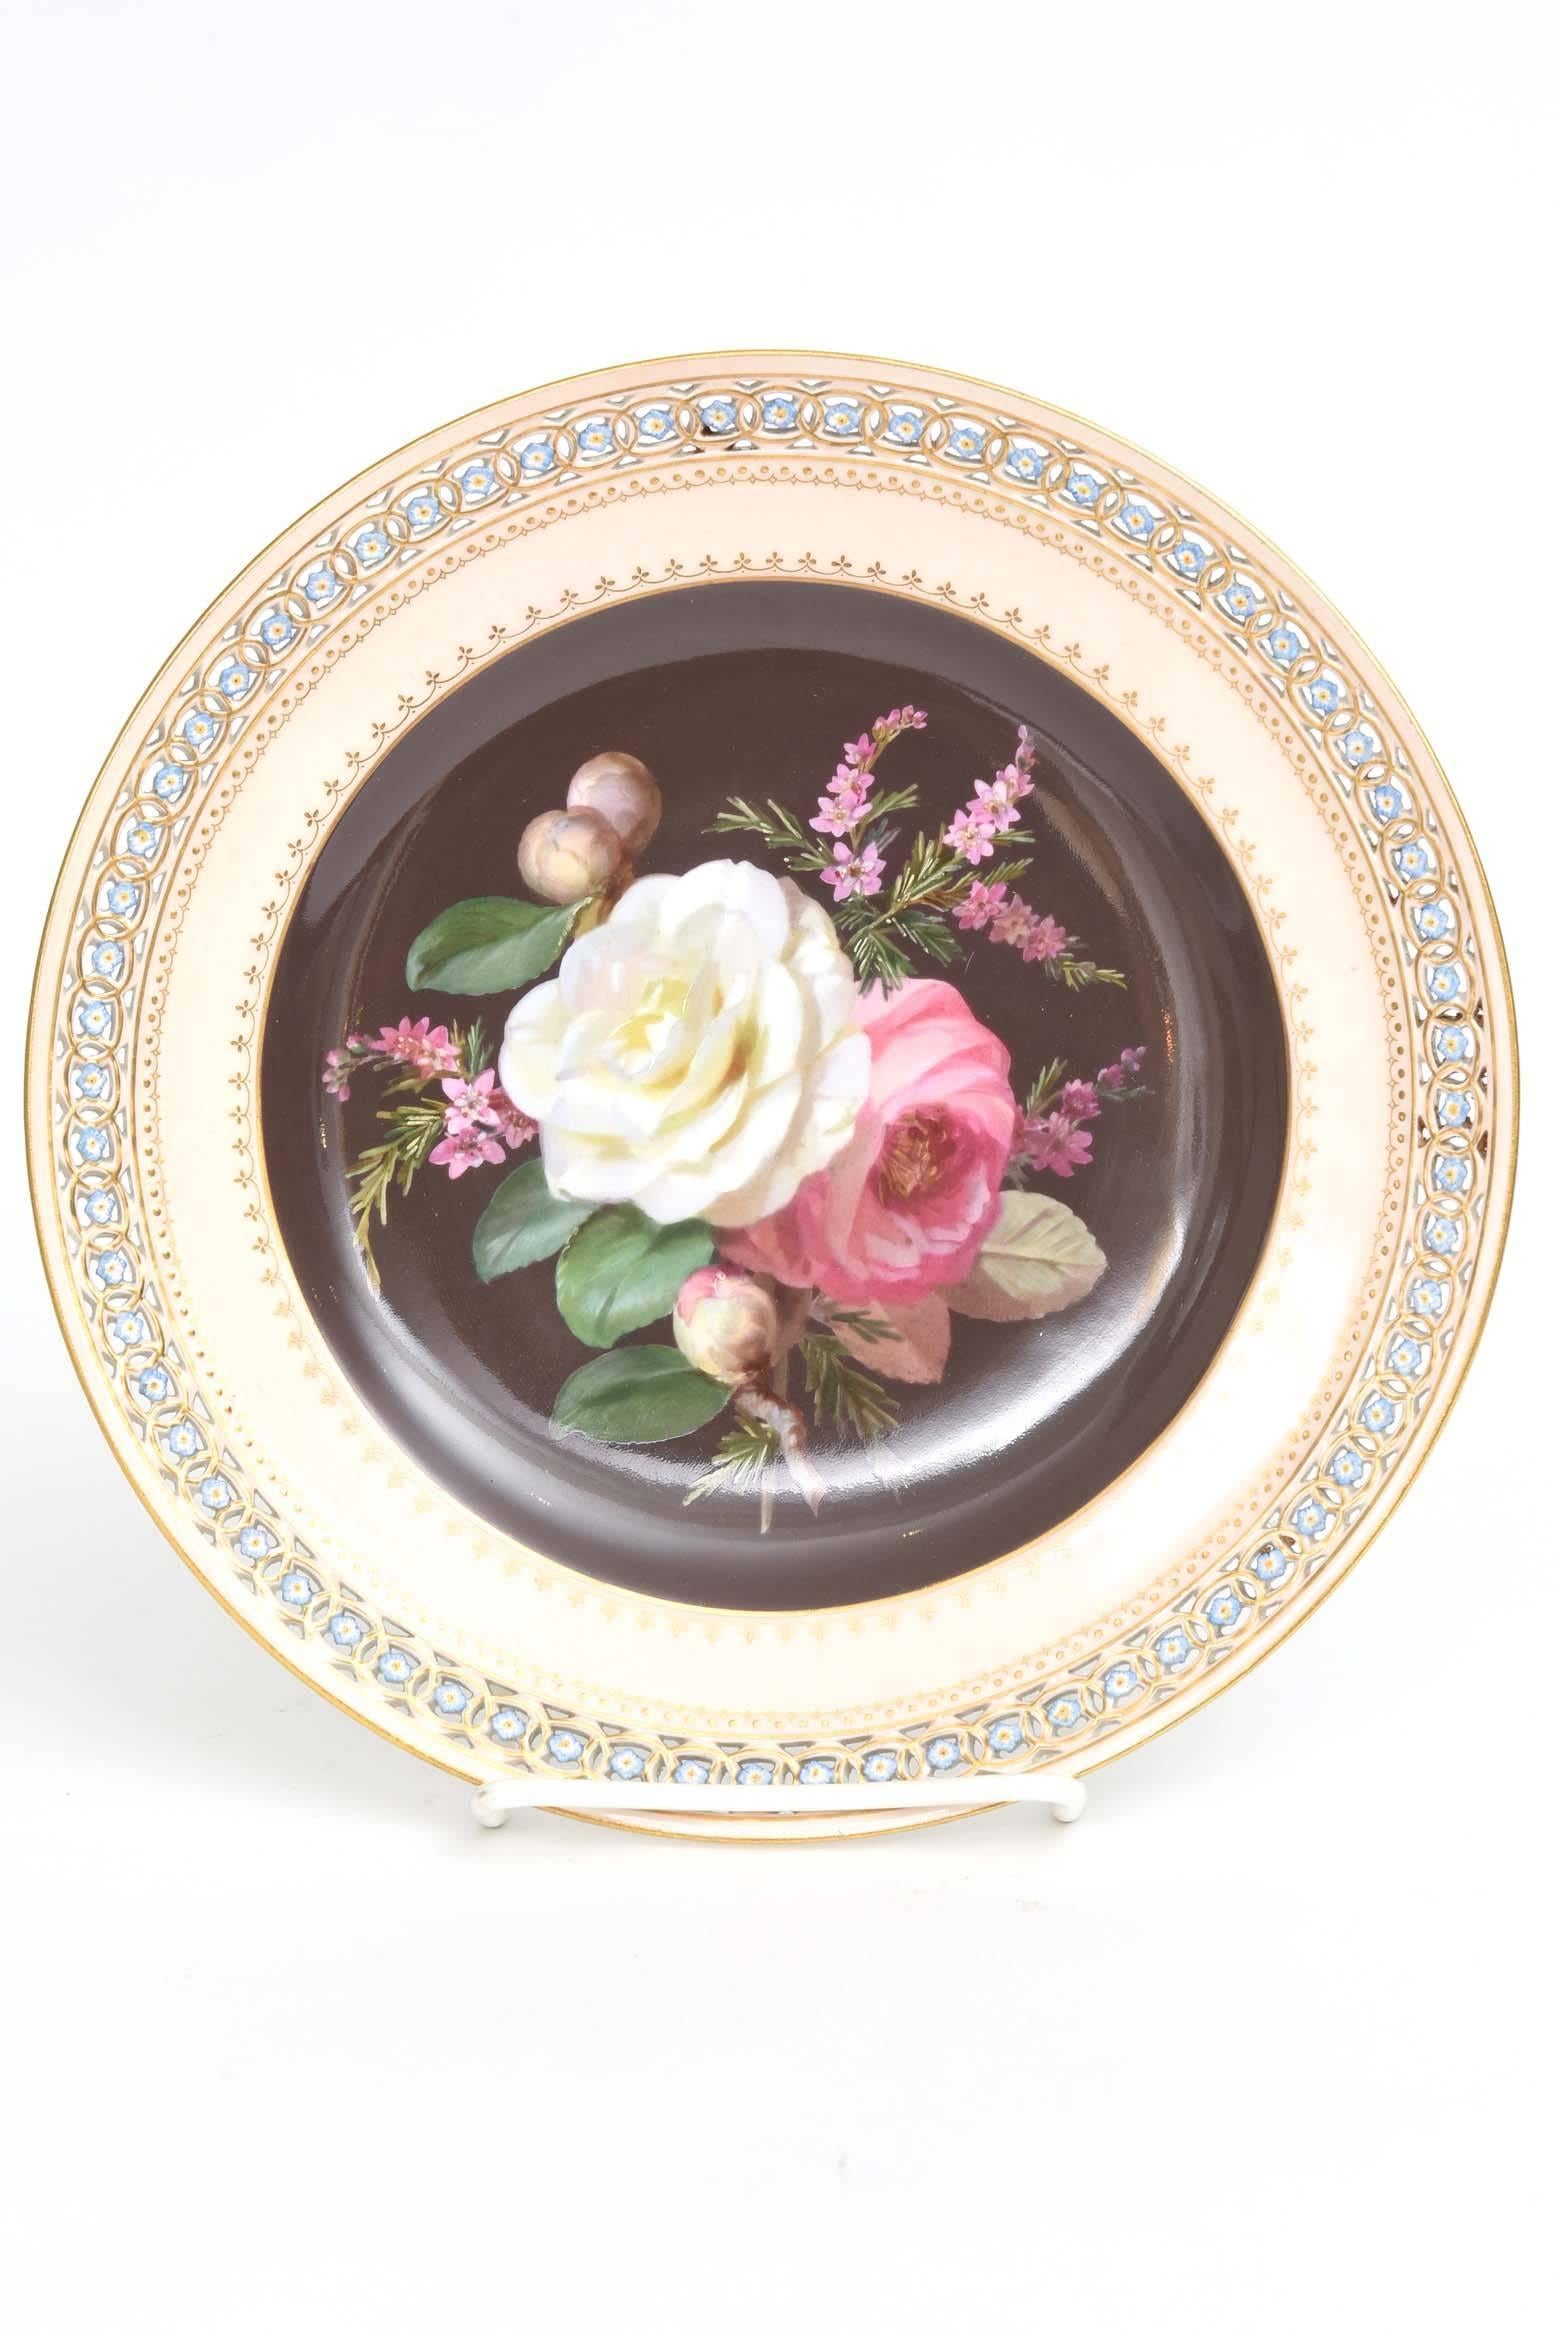 Hand-Crafted Rare Meissen Fine Porcelain Cabinet Pieces. Hand-Painted Botanicals, Reticulated